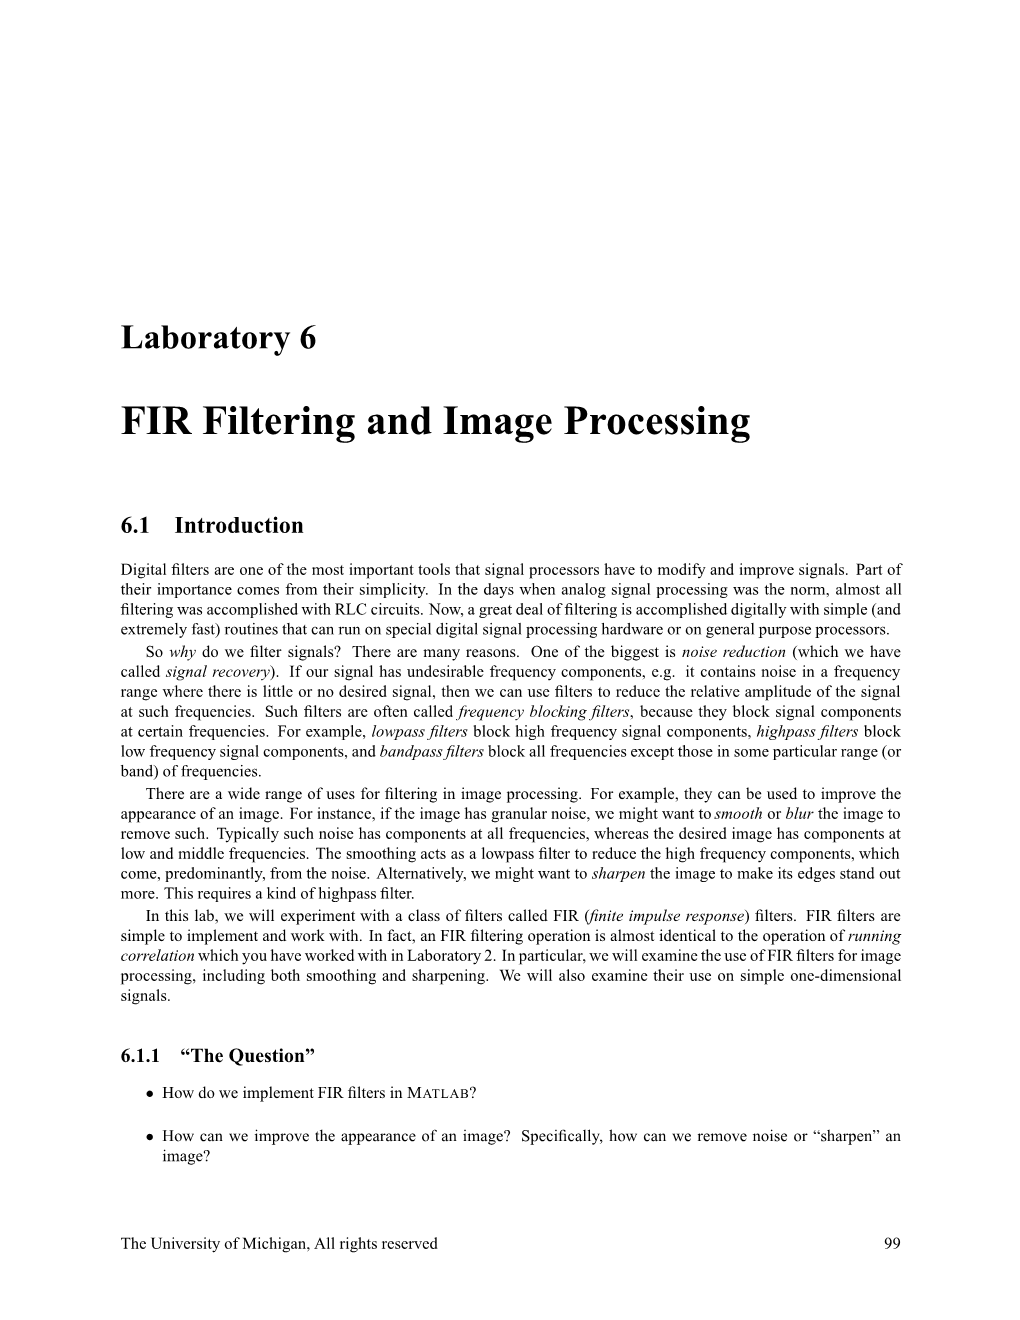 FIR Filtering and Image Processing